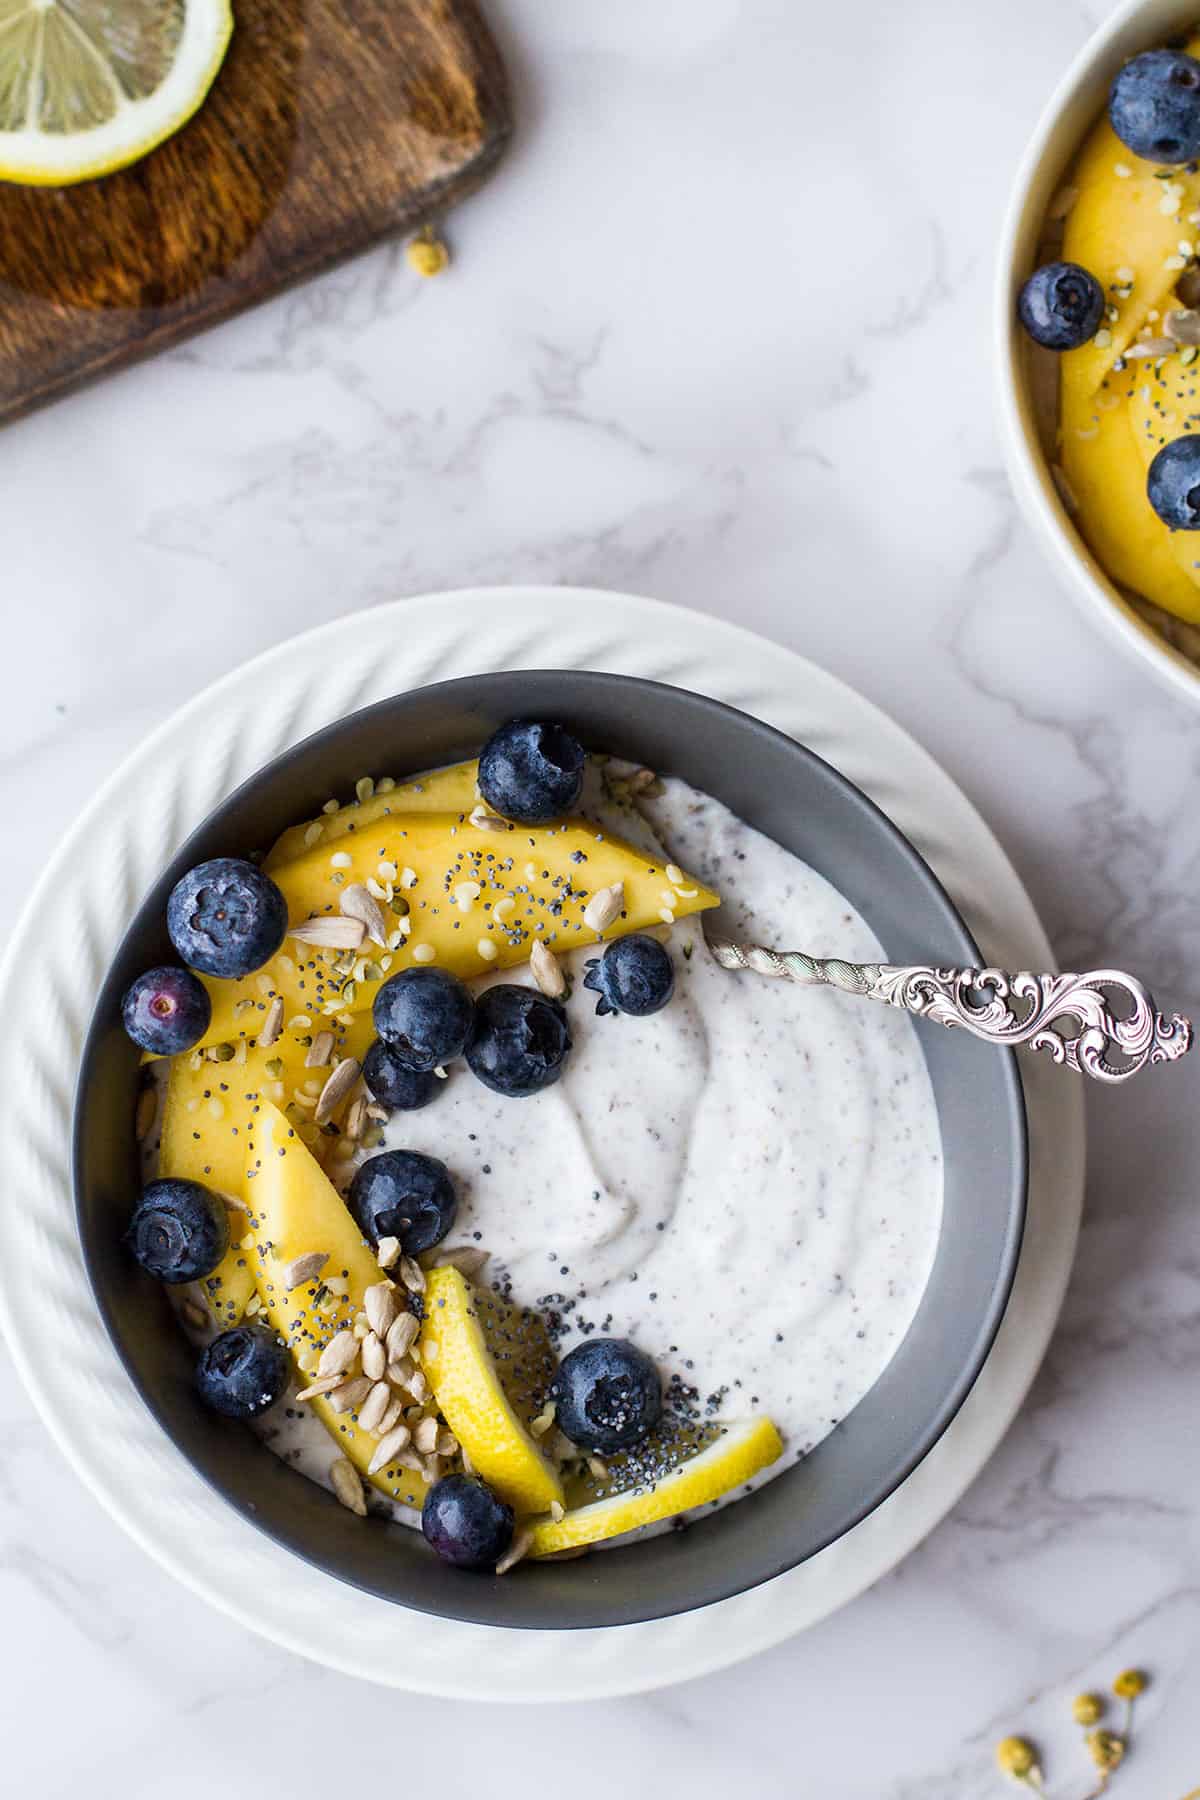 Bowl of chia yogurt, chunks of mango and blueberries. Seen from above.